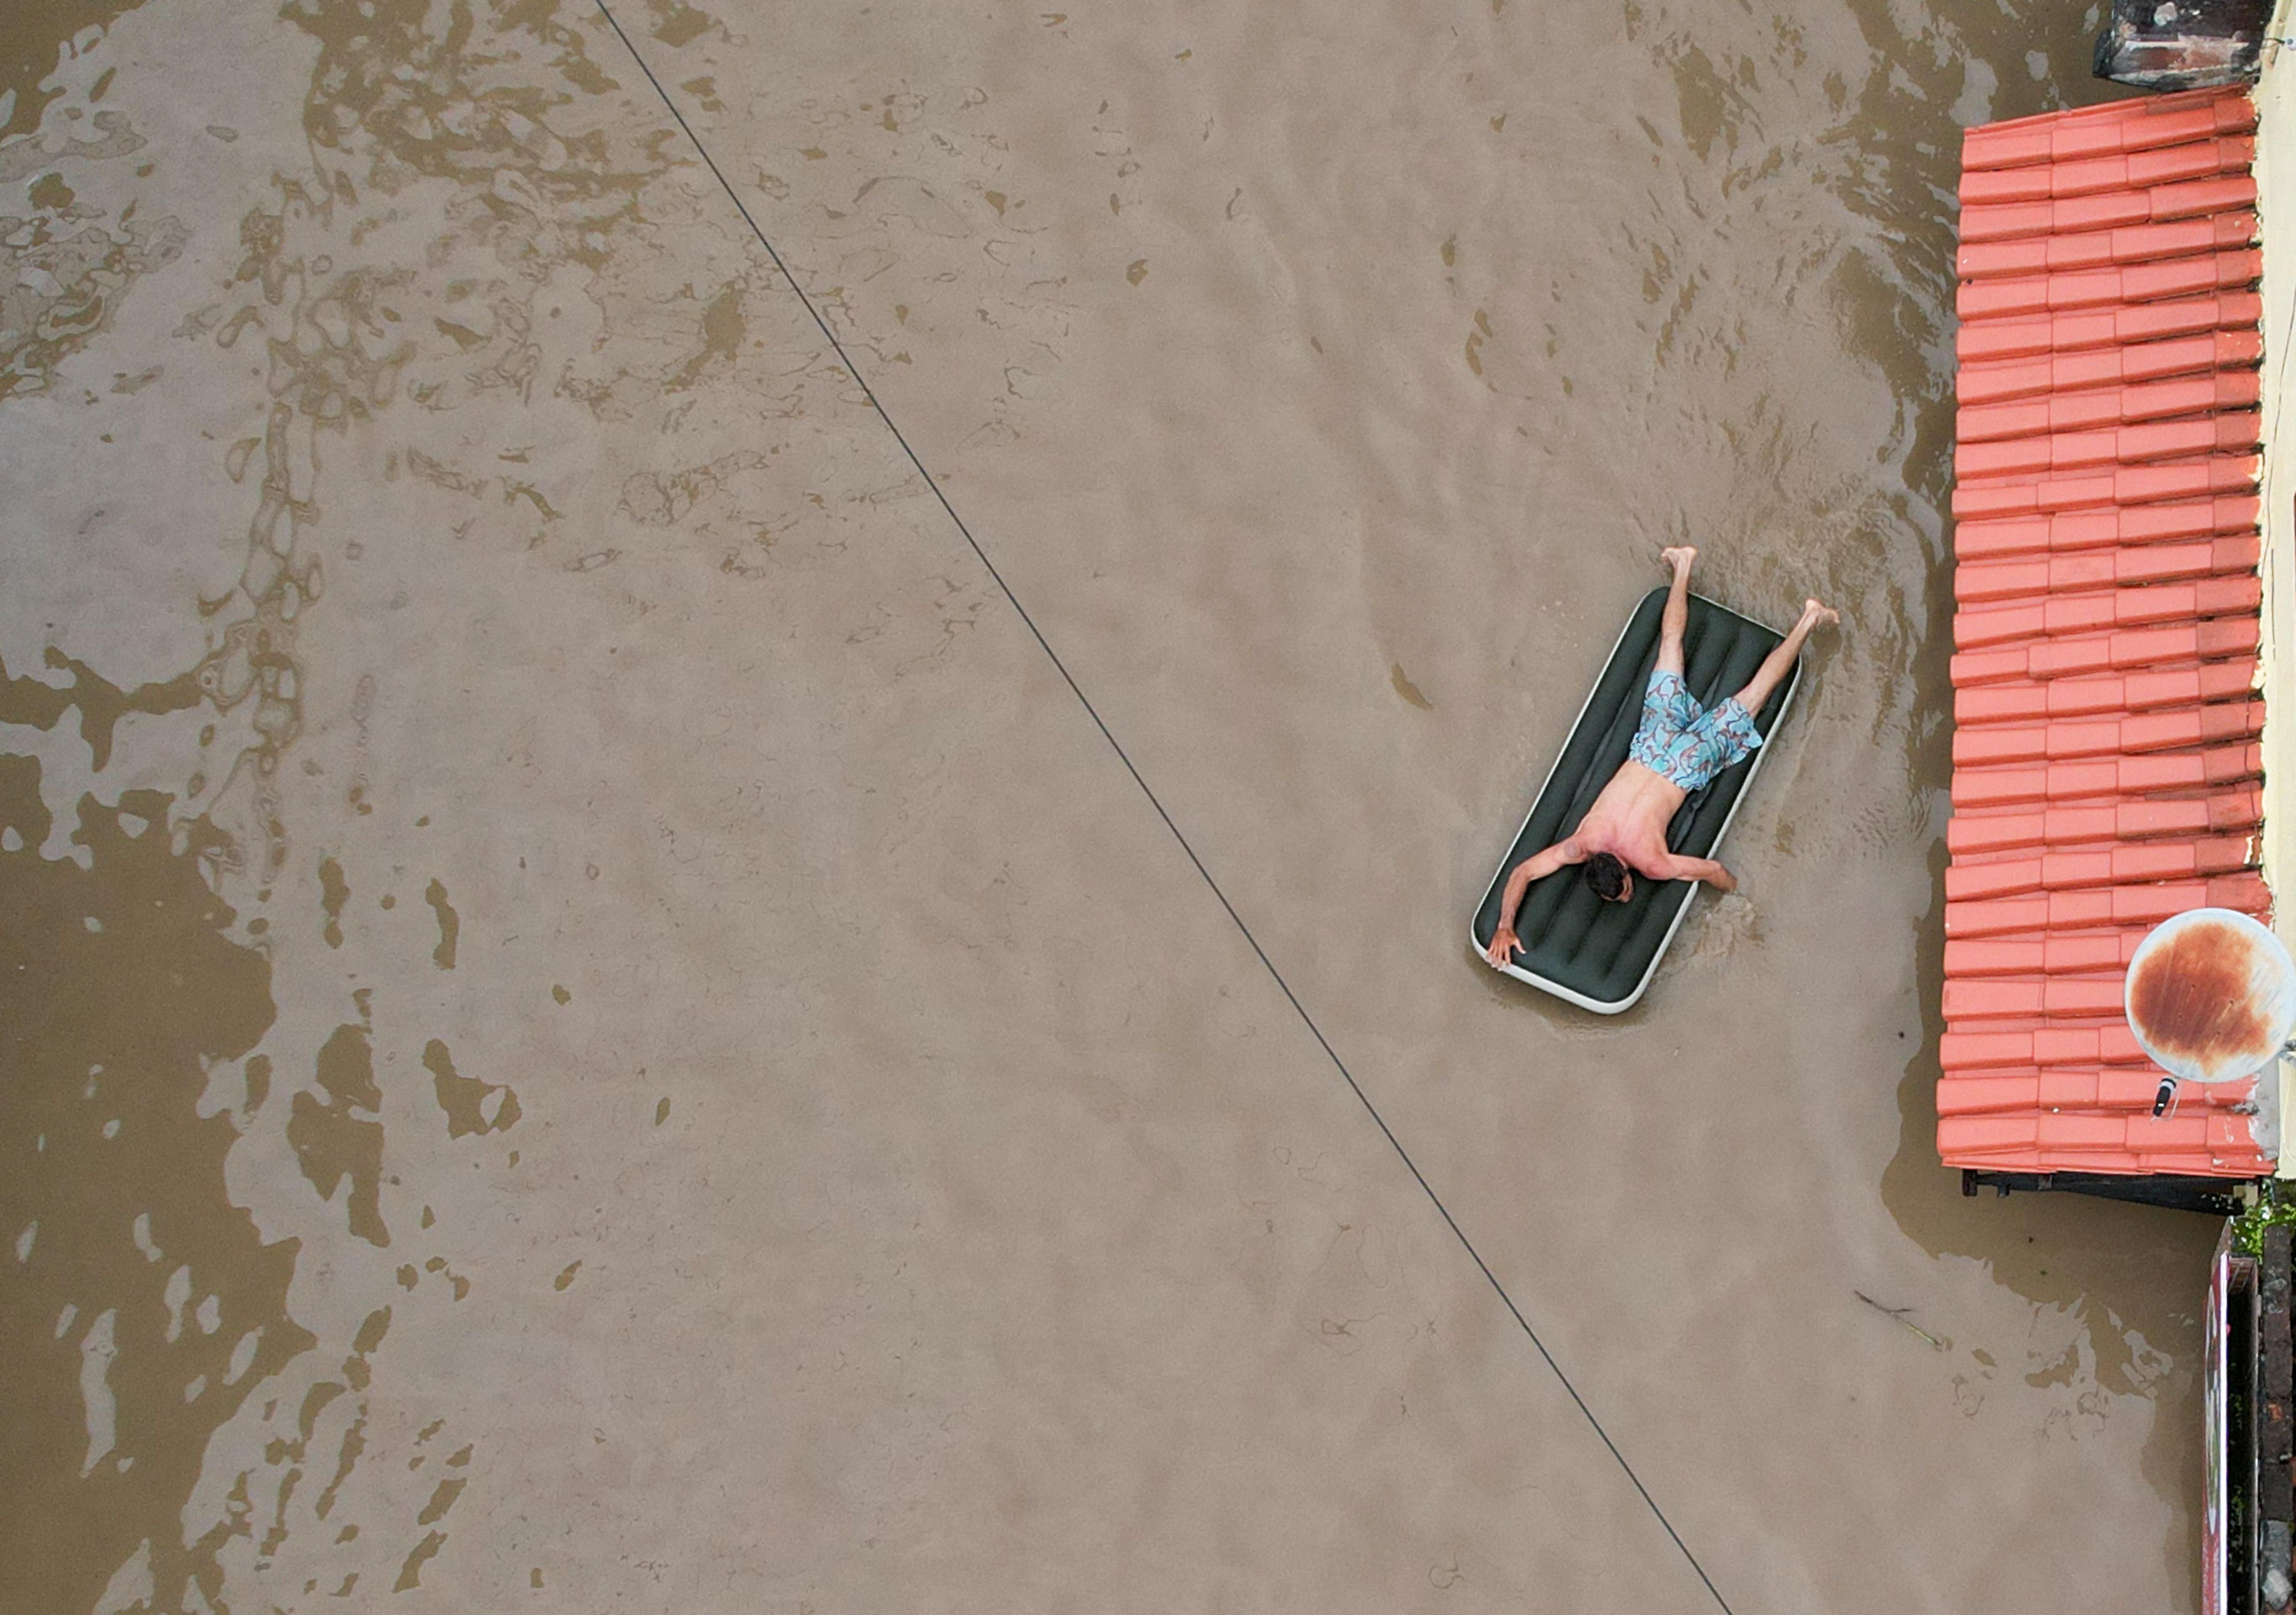 A man uses an inflatable mattress during flooding caused by the overflowing Cachoeira river in Itabuna, Bahia state, Brazil, December 26, 2021. Picture taken with a drone.